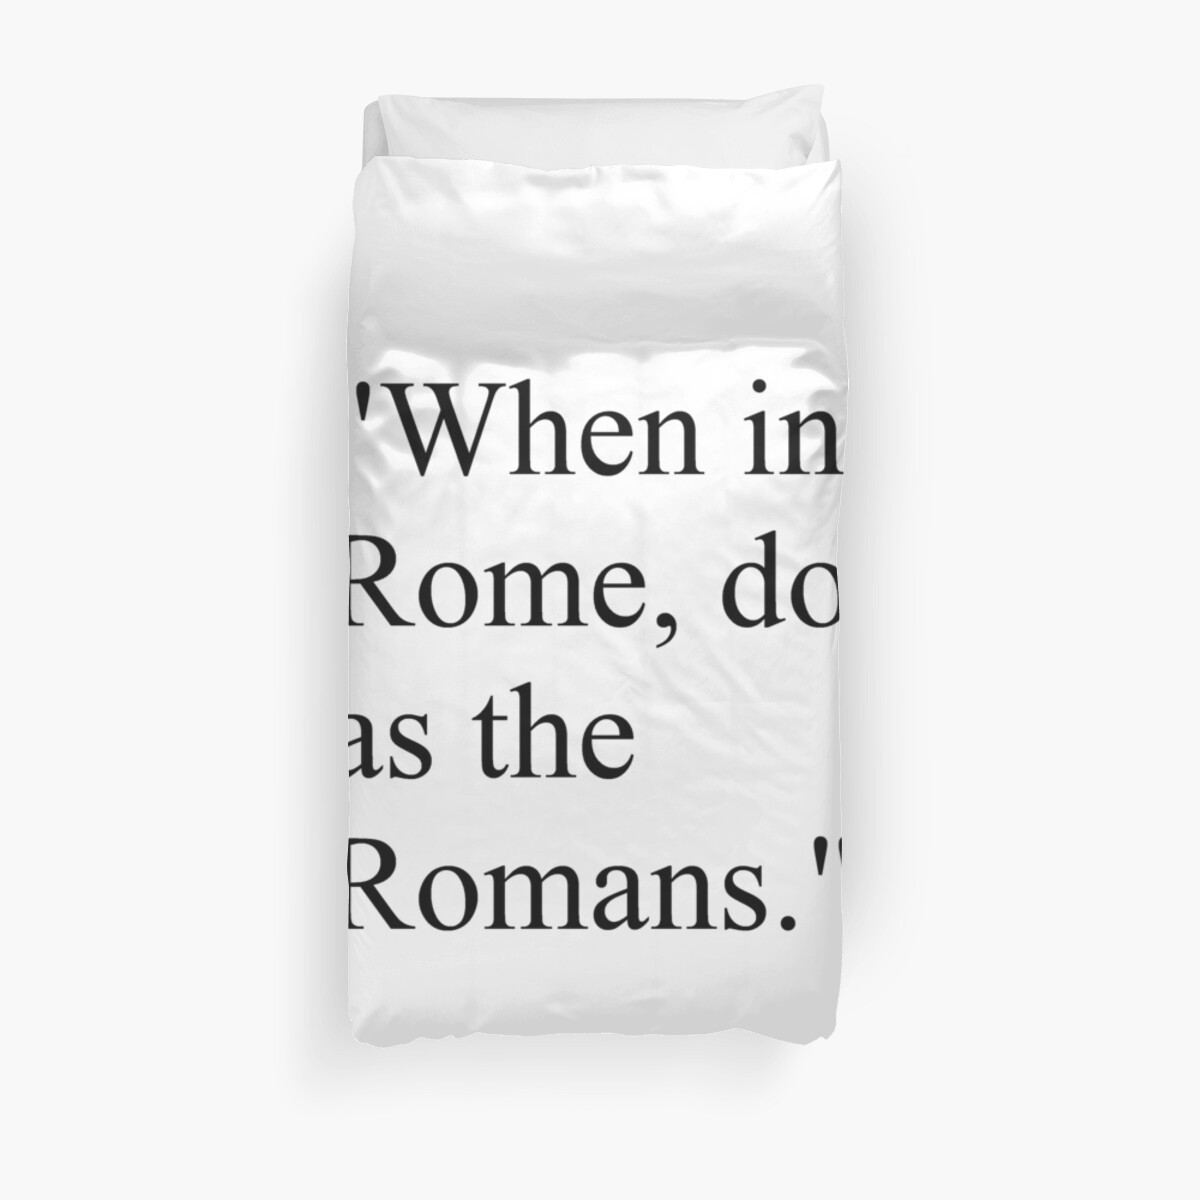 saying when in rome